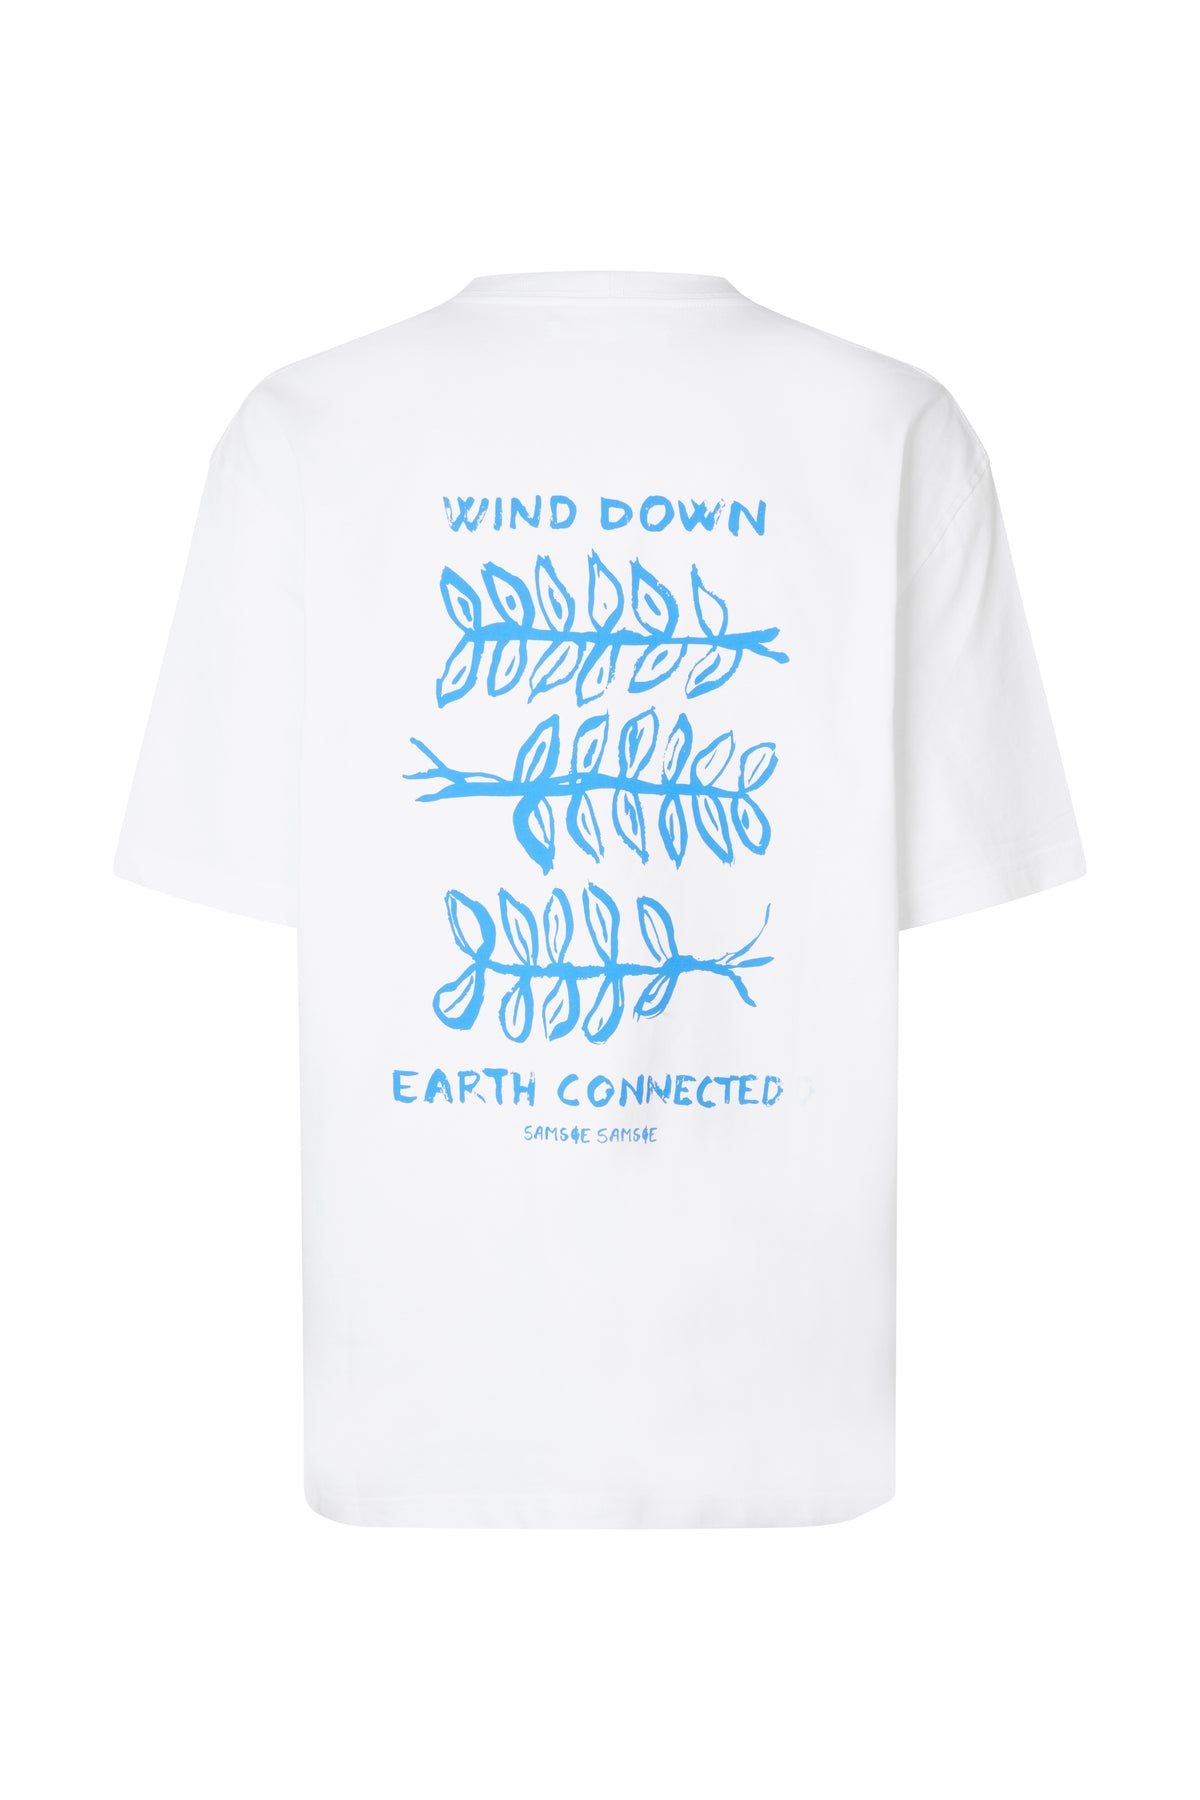 Sawind Uni T-Shirt - White Connected